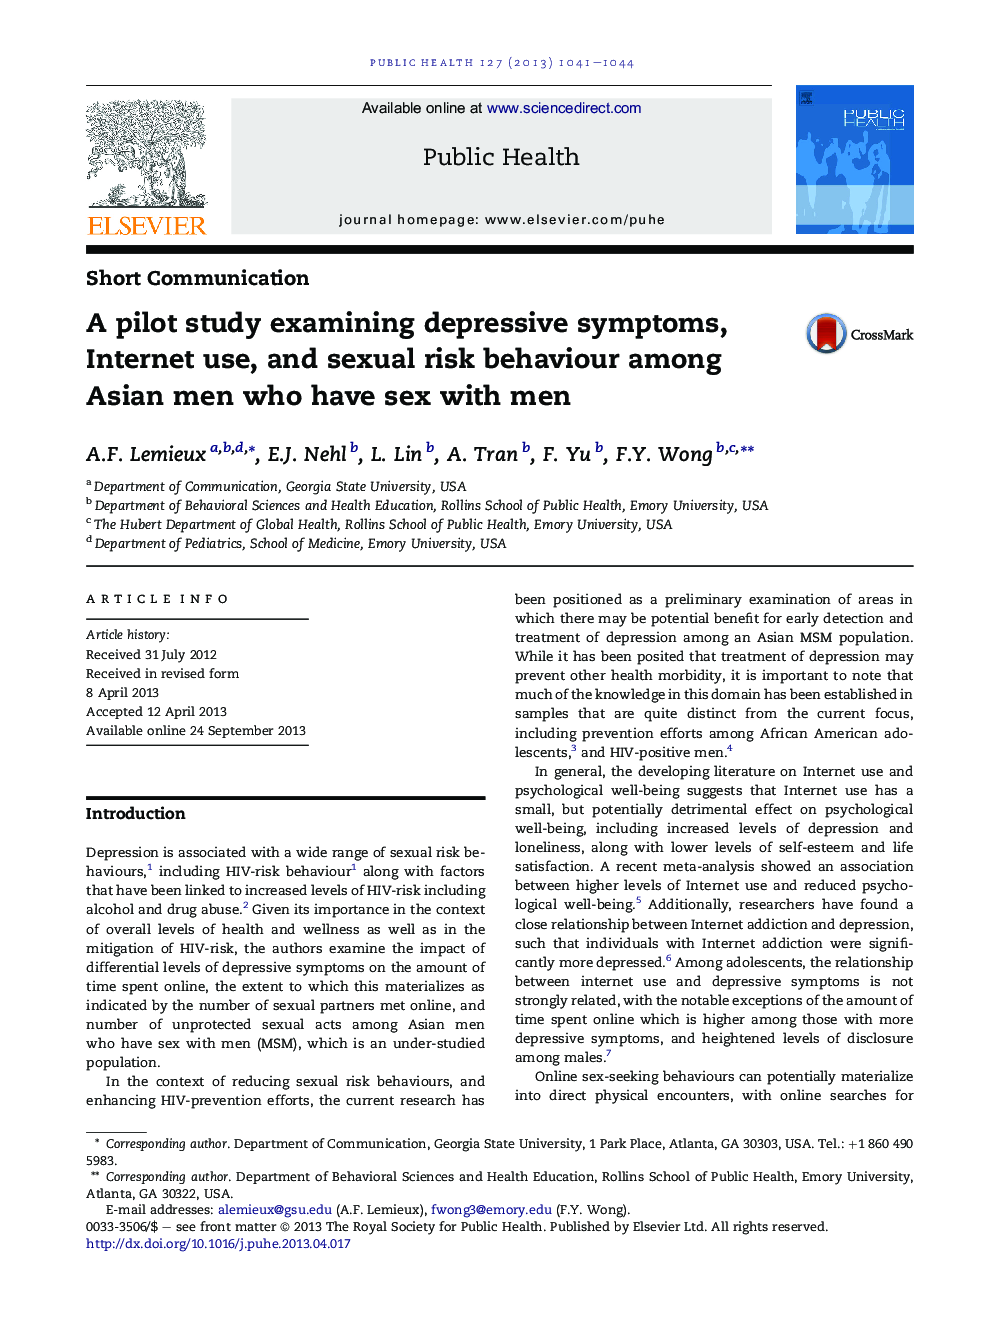 A pilot study examining depressive symptoms, Internet use, and sexual risk behaviour among Asian men who have sex with men